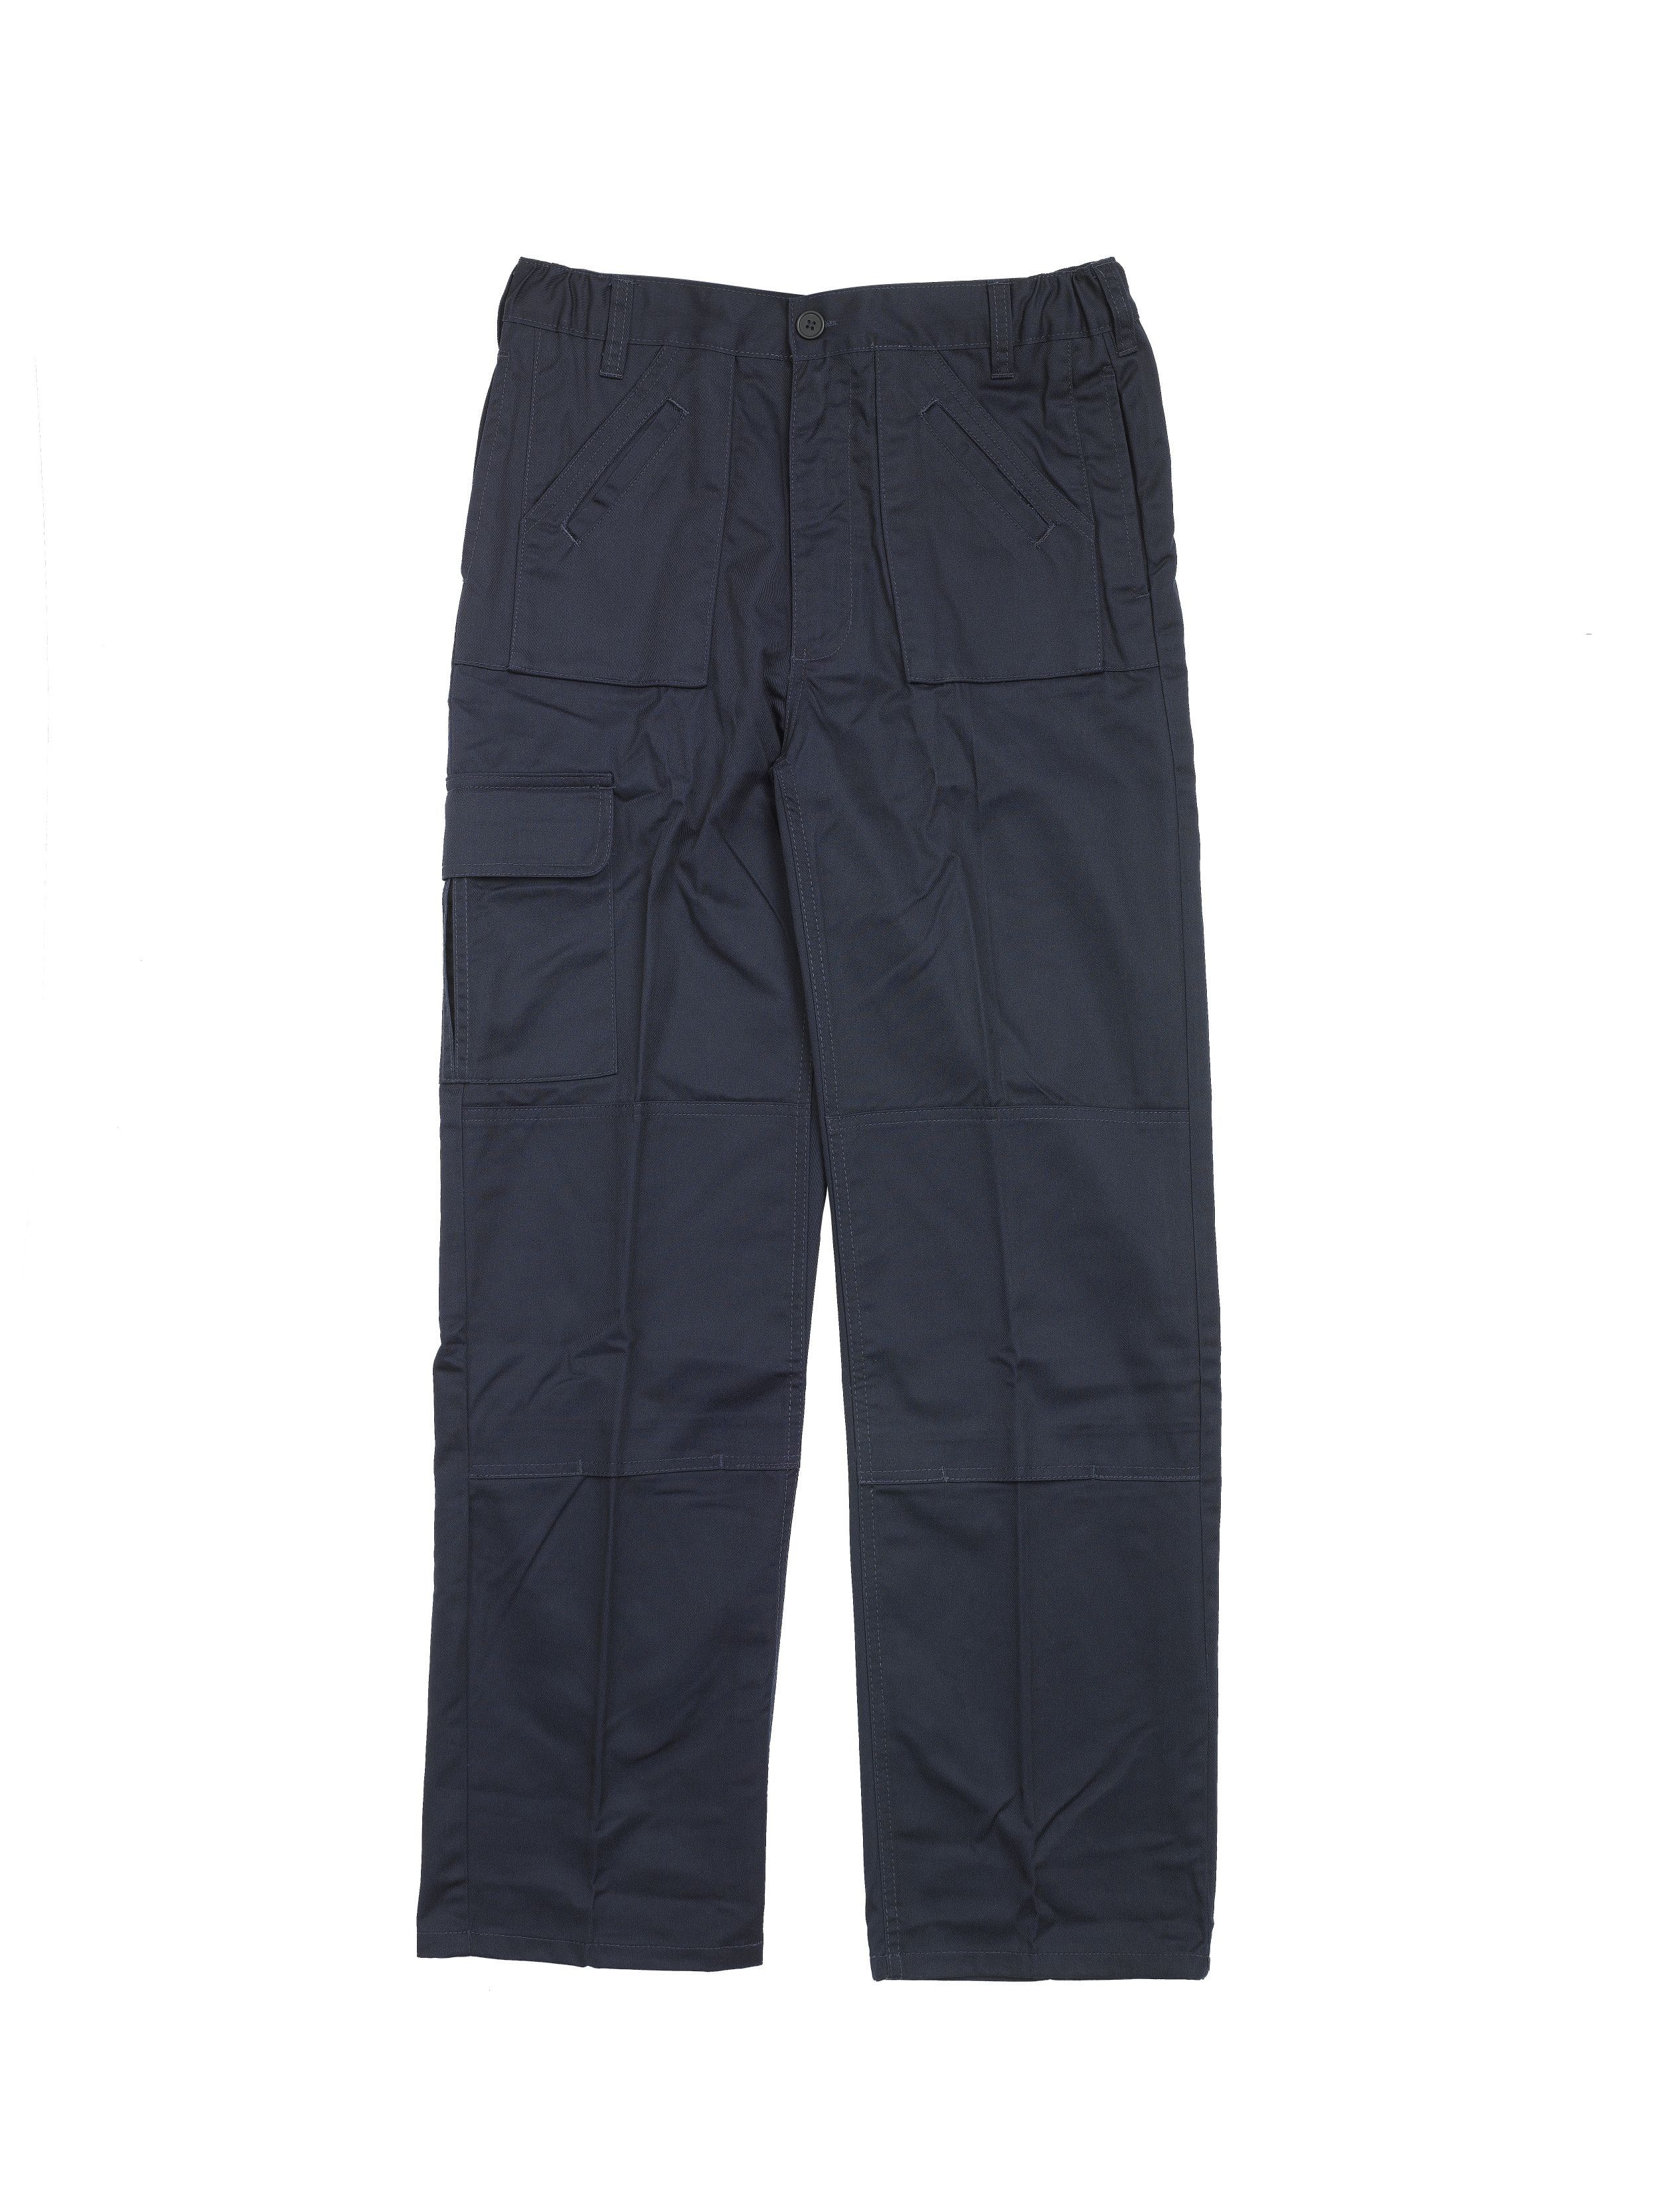 COMBAT TROUSER | Warrior Protects